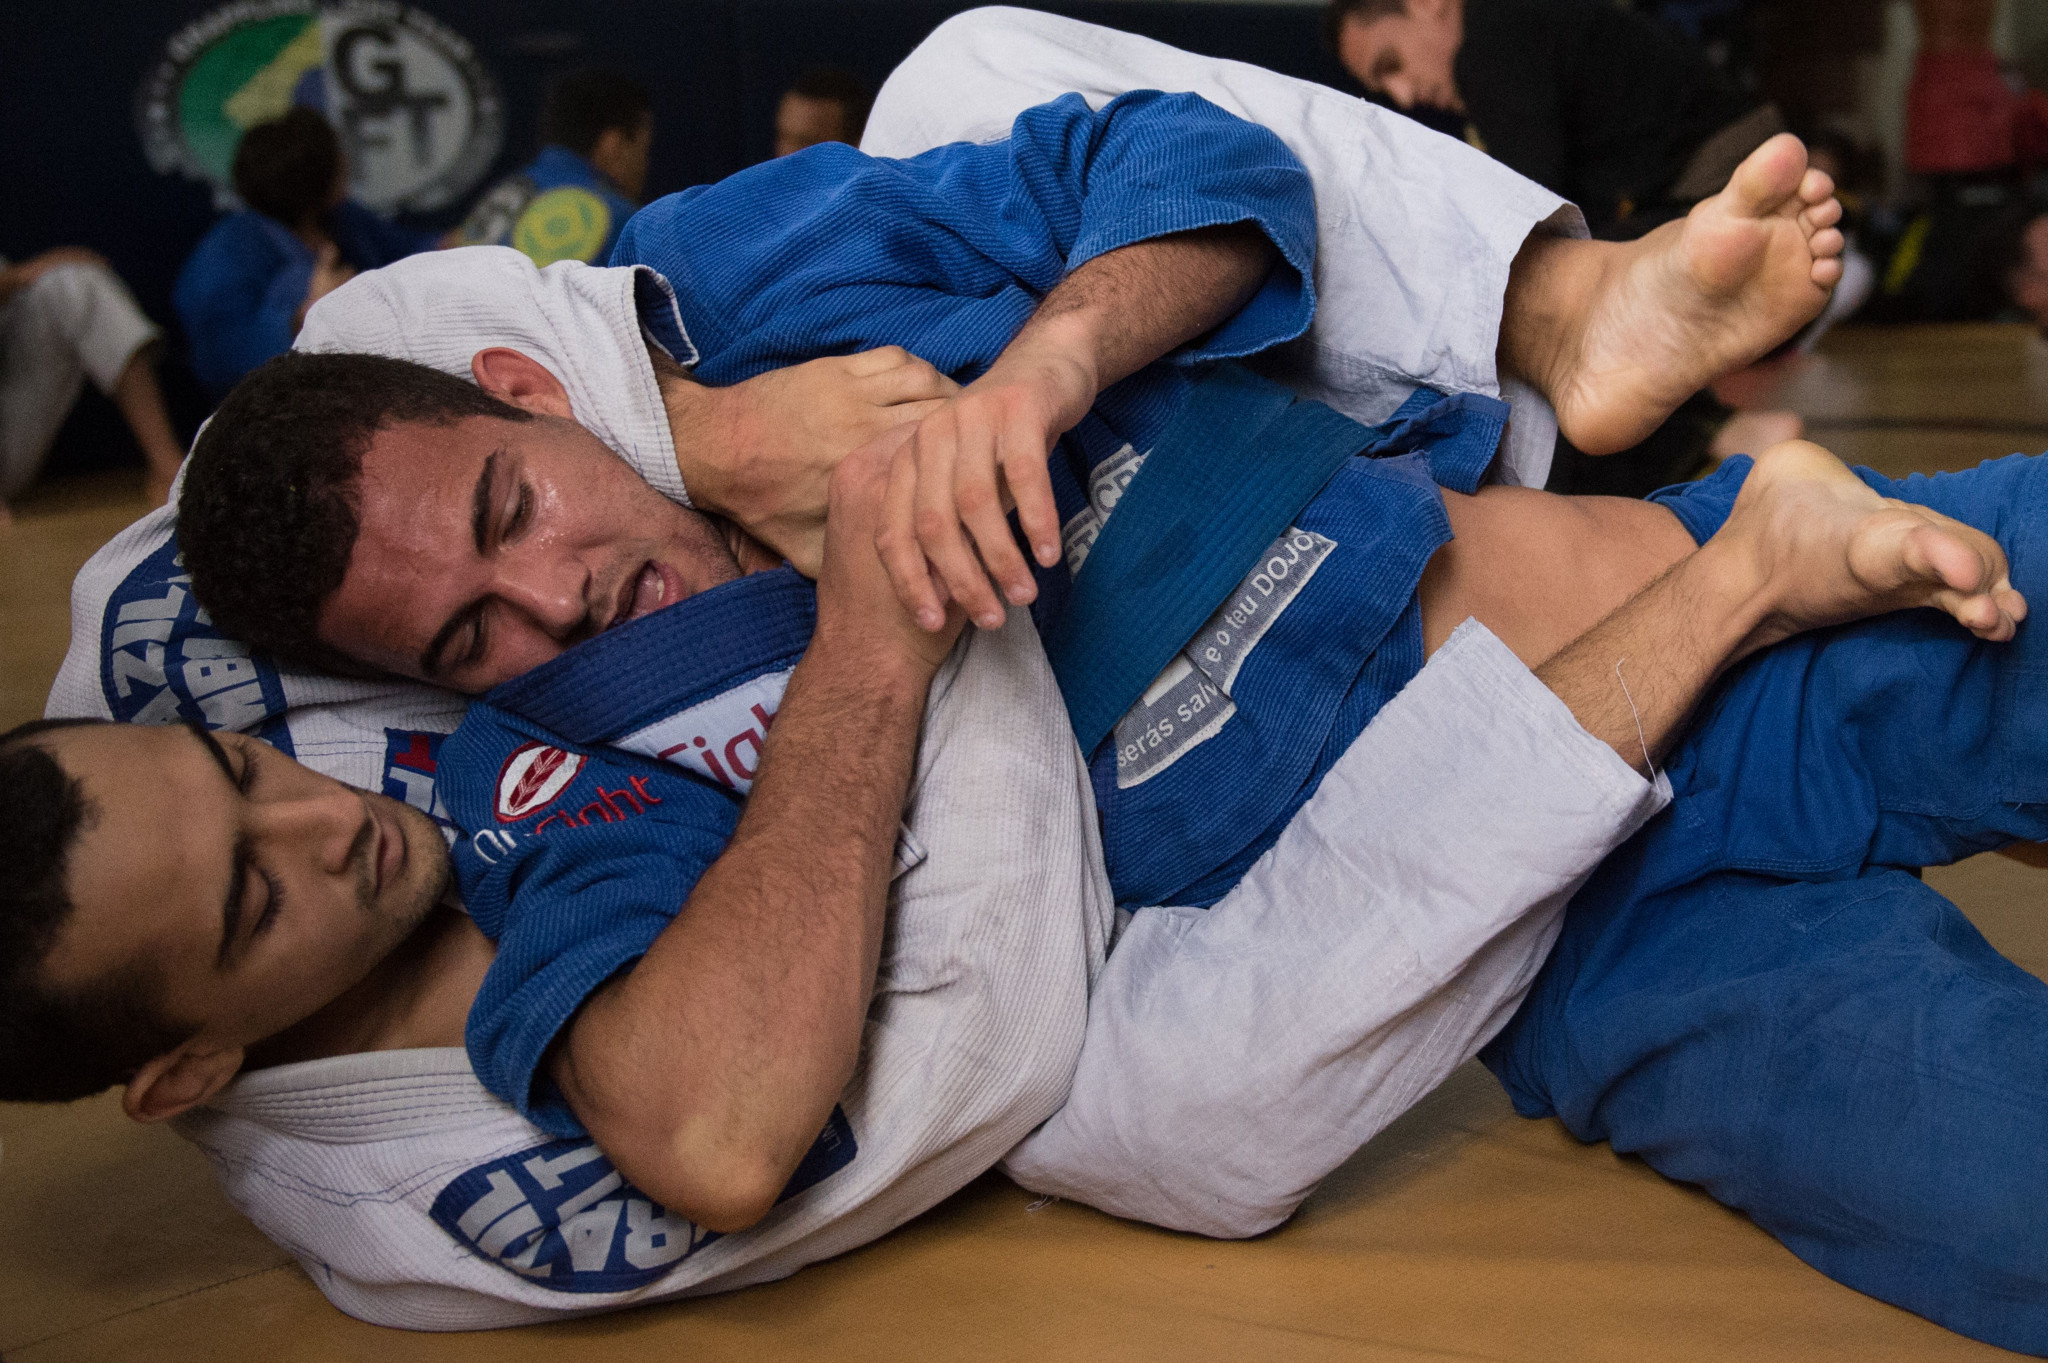 Brazilian ju-jitsu has spread rapidly across the world, and focuses on ground combat and submissions ©Getty Images